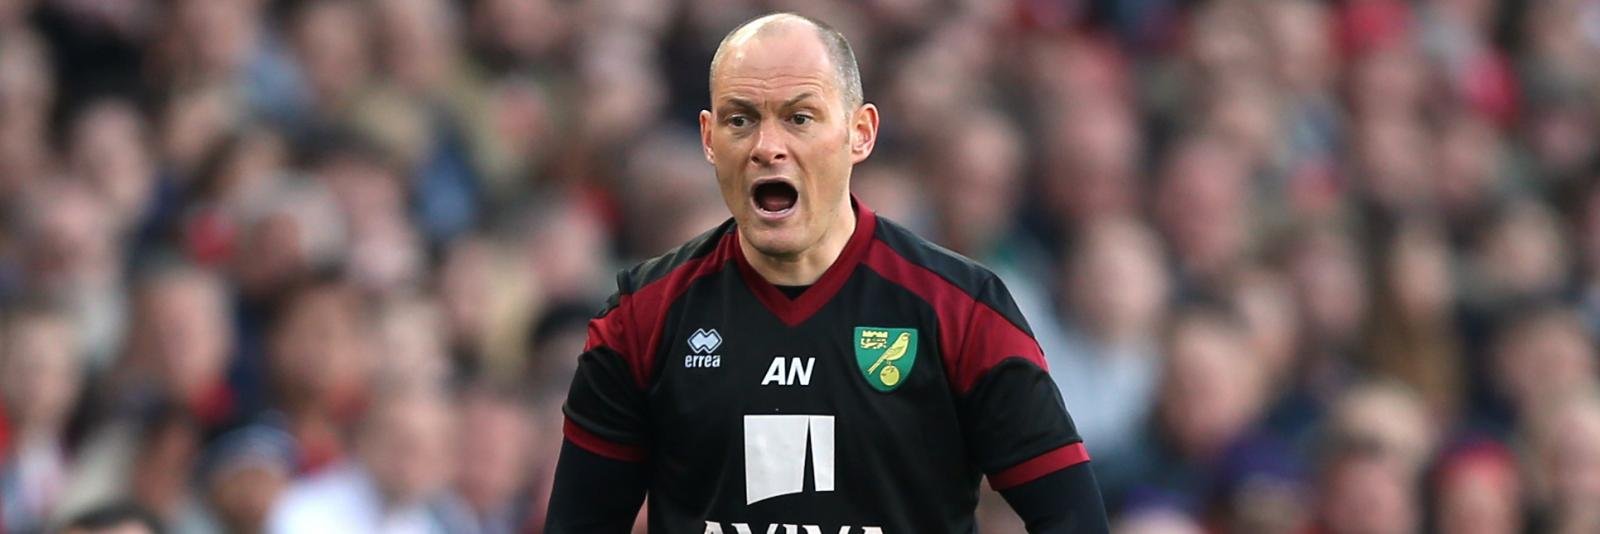 Norwich City’s Alex Neil is a man determined to right his own wrongs